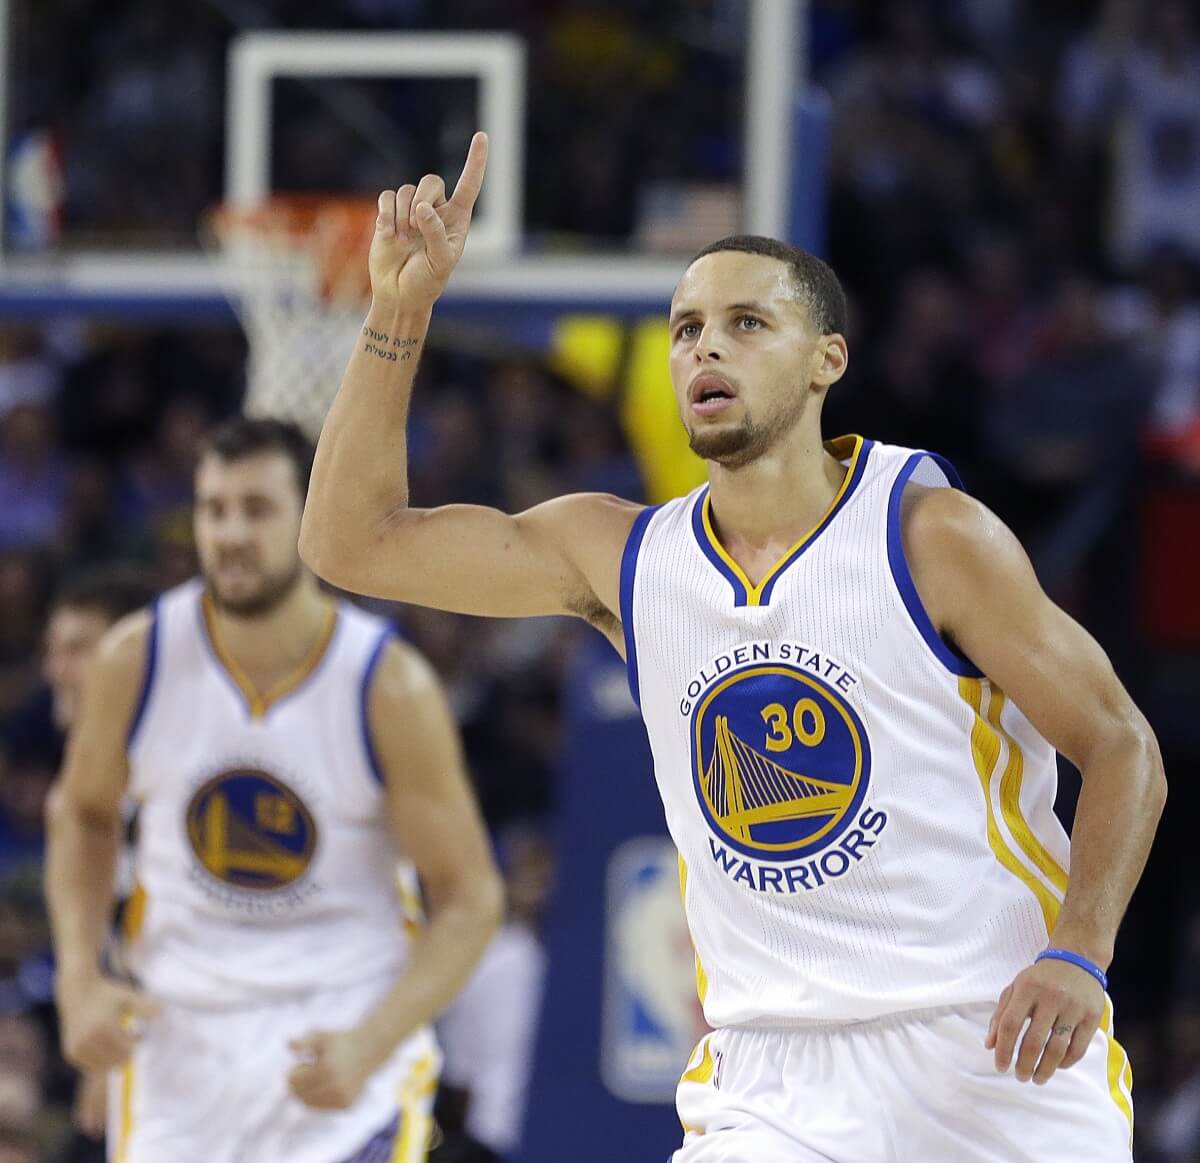 Stephen Curry led the Warriors to victory. (AP)